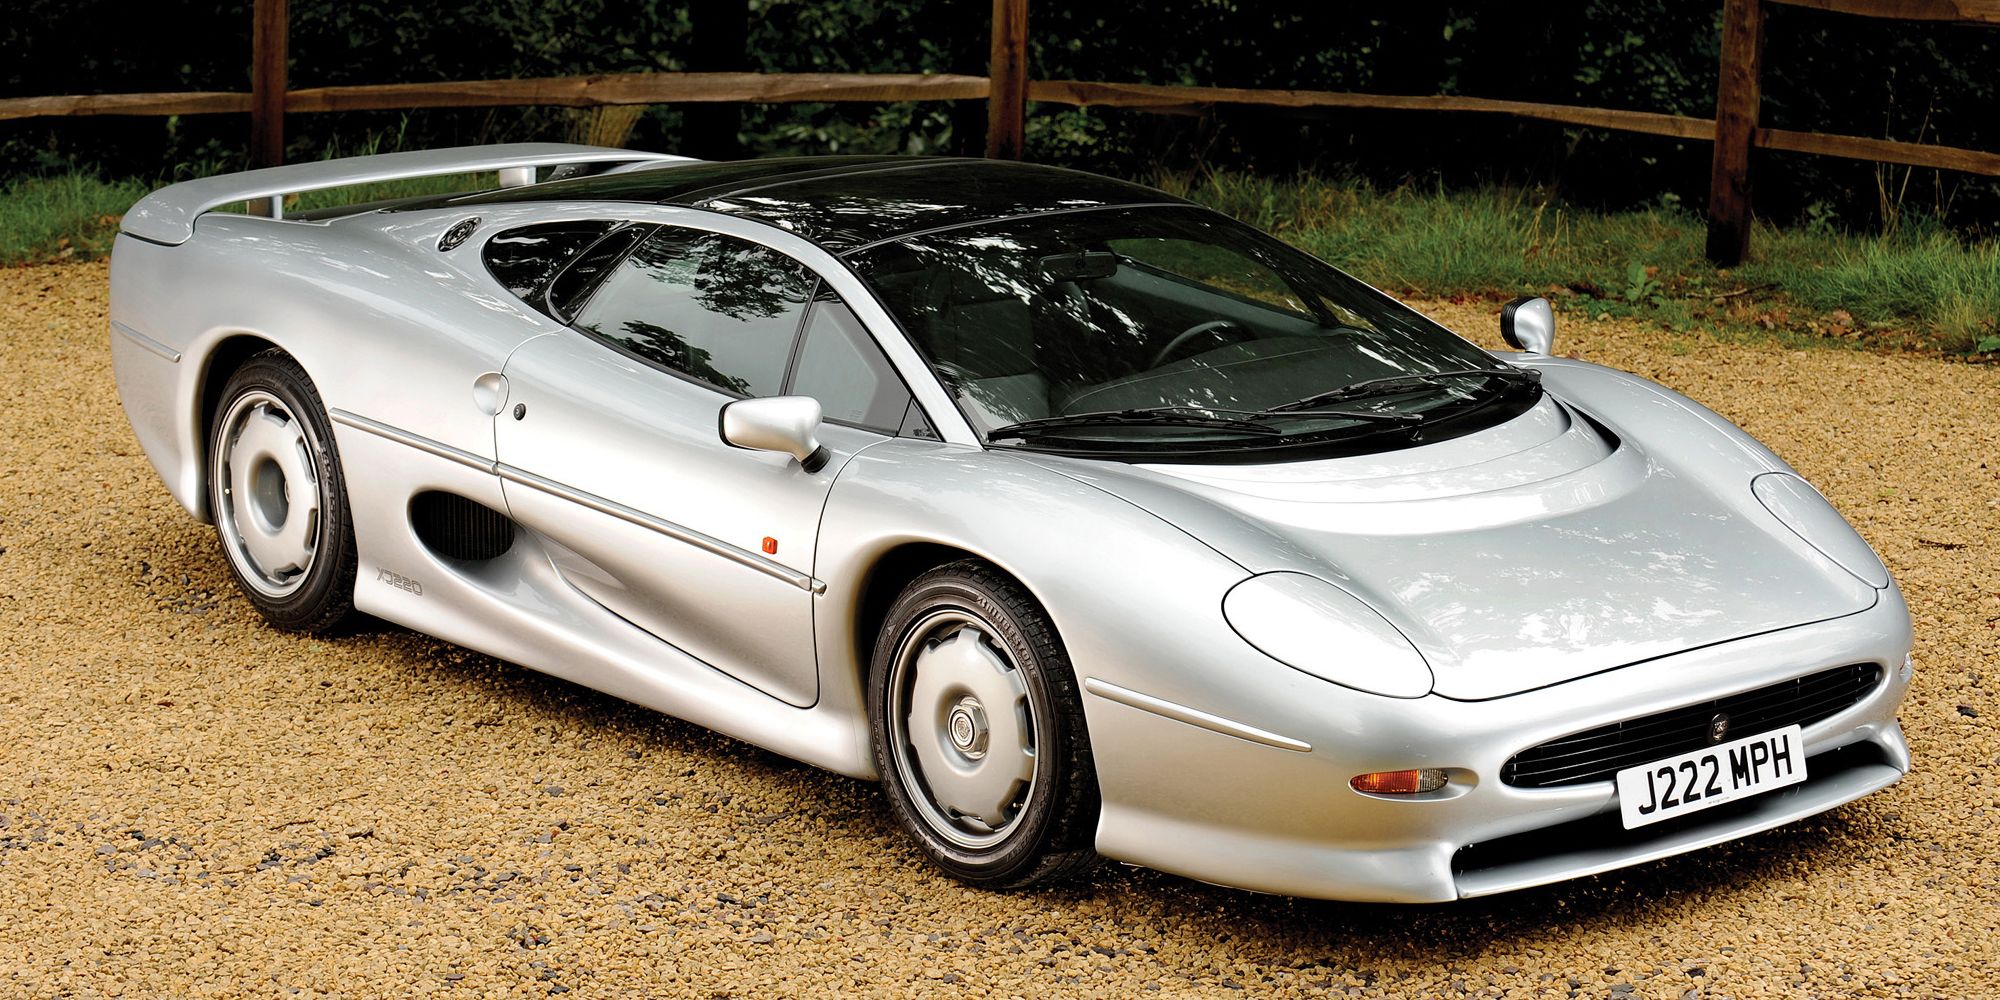 Front 3/4 view of the XJ220